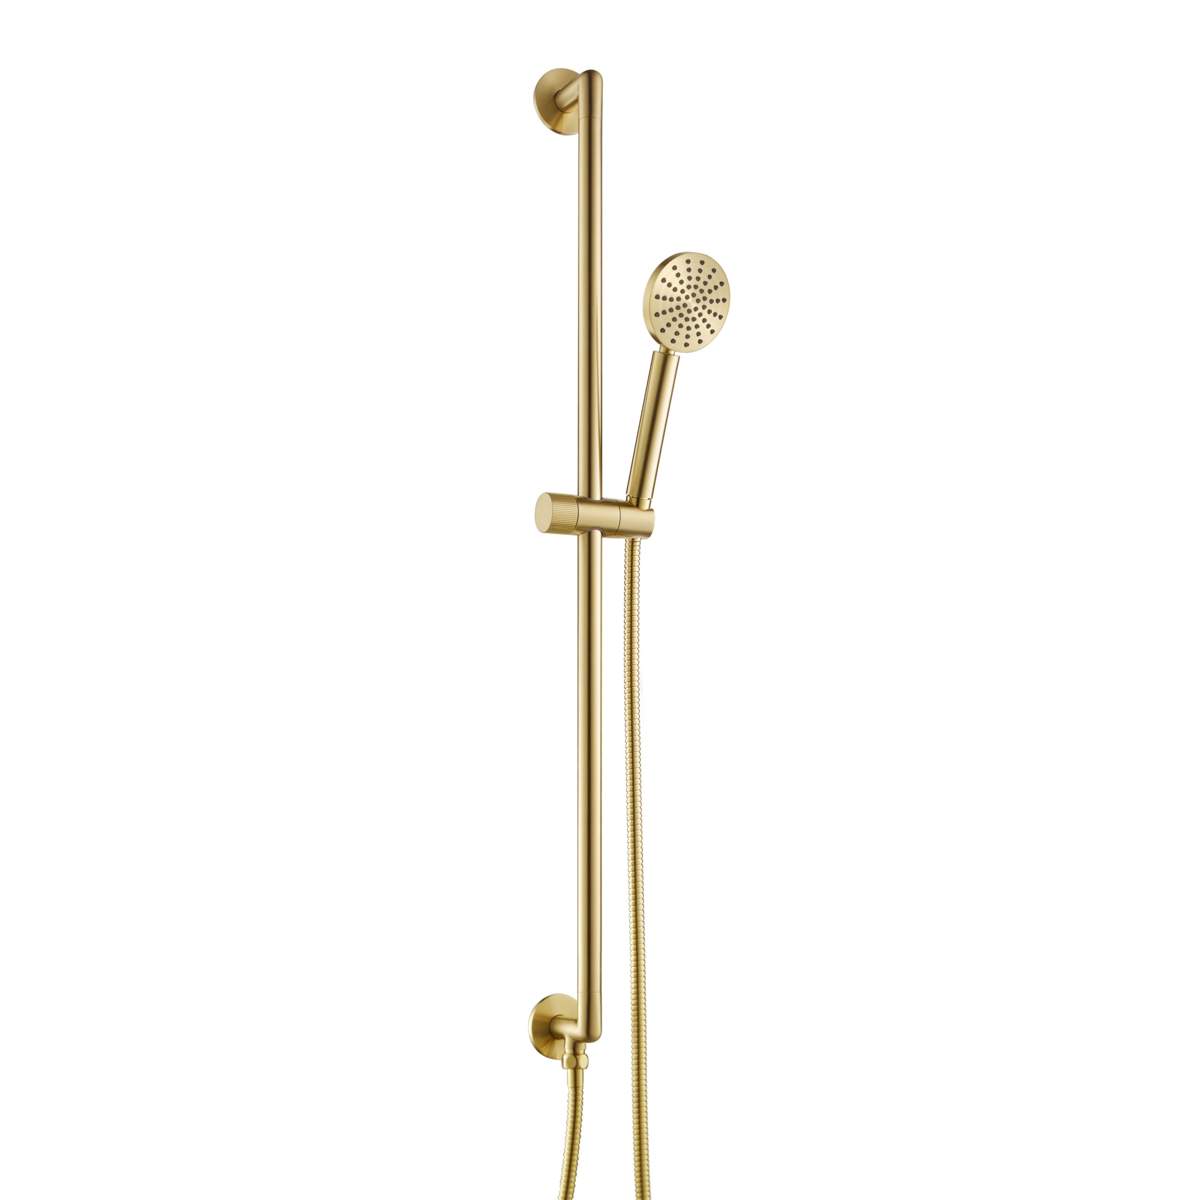 JTP Evo Brushed Brass Slide Rail with Round Shower Handle and Hose